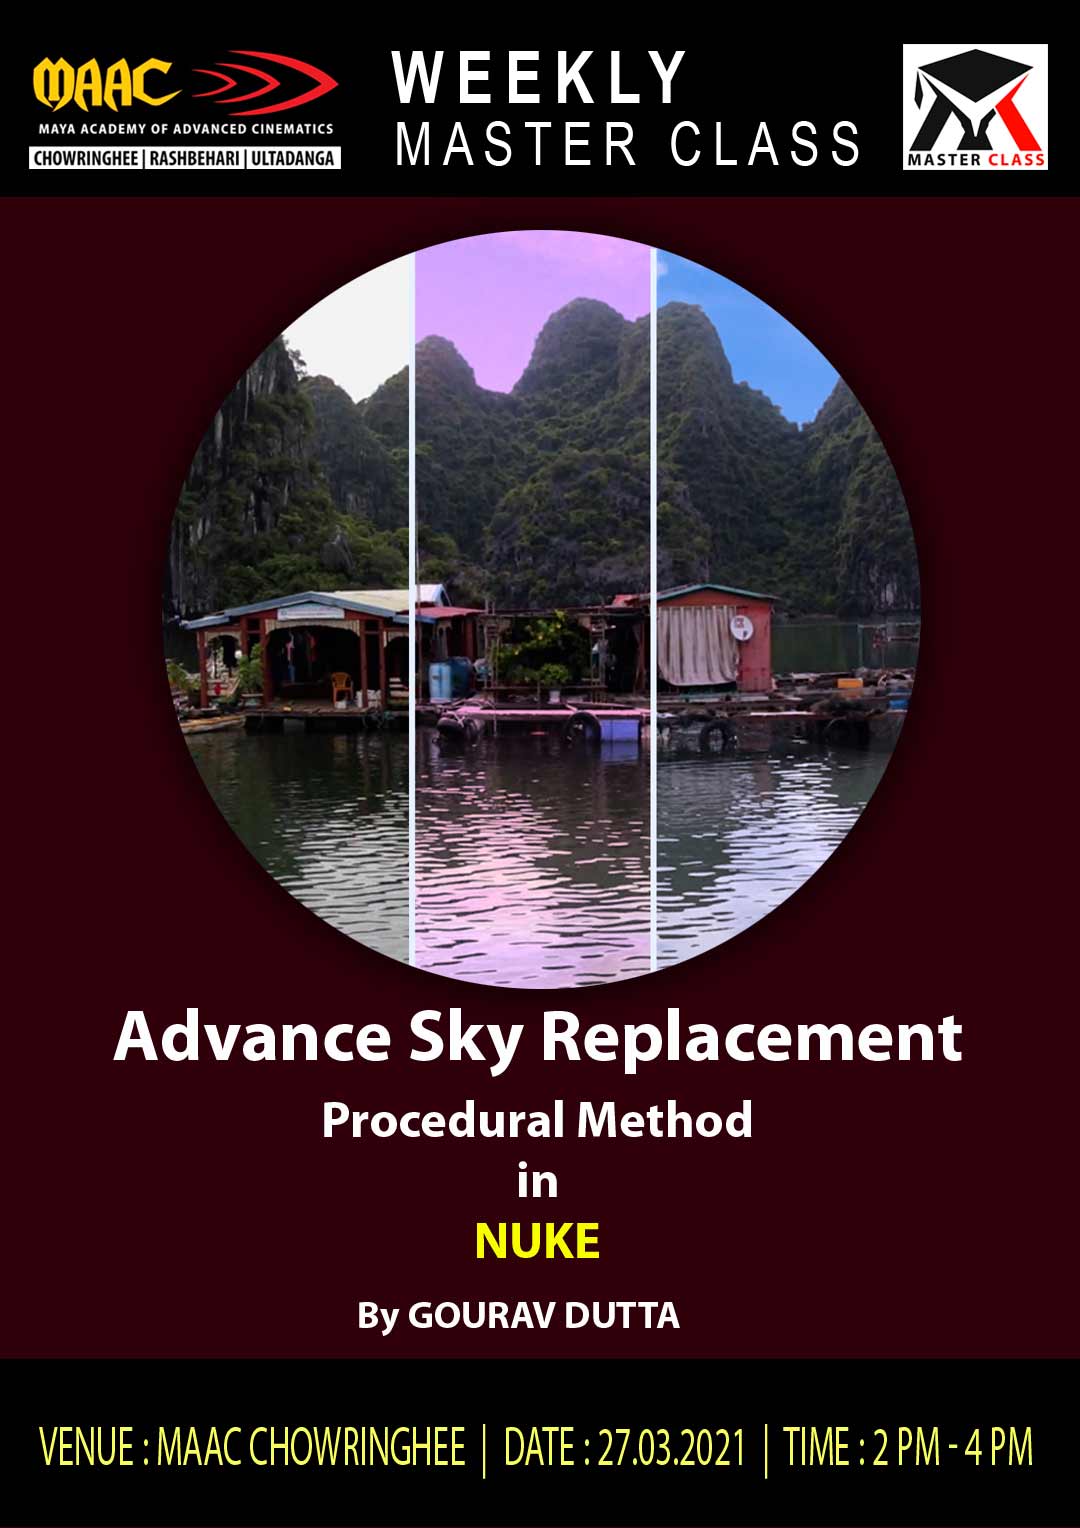 Weekly Master Class on Advanced Sky Replacement in NUKE